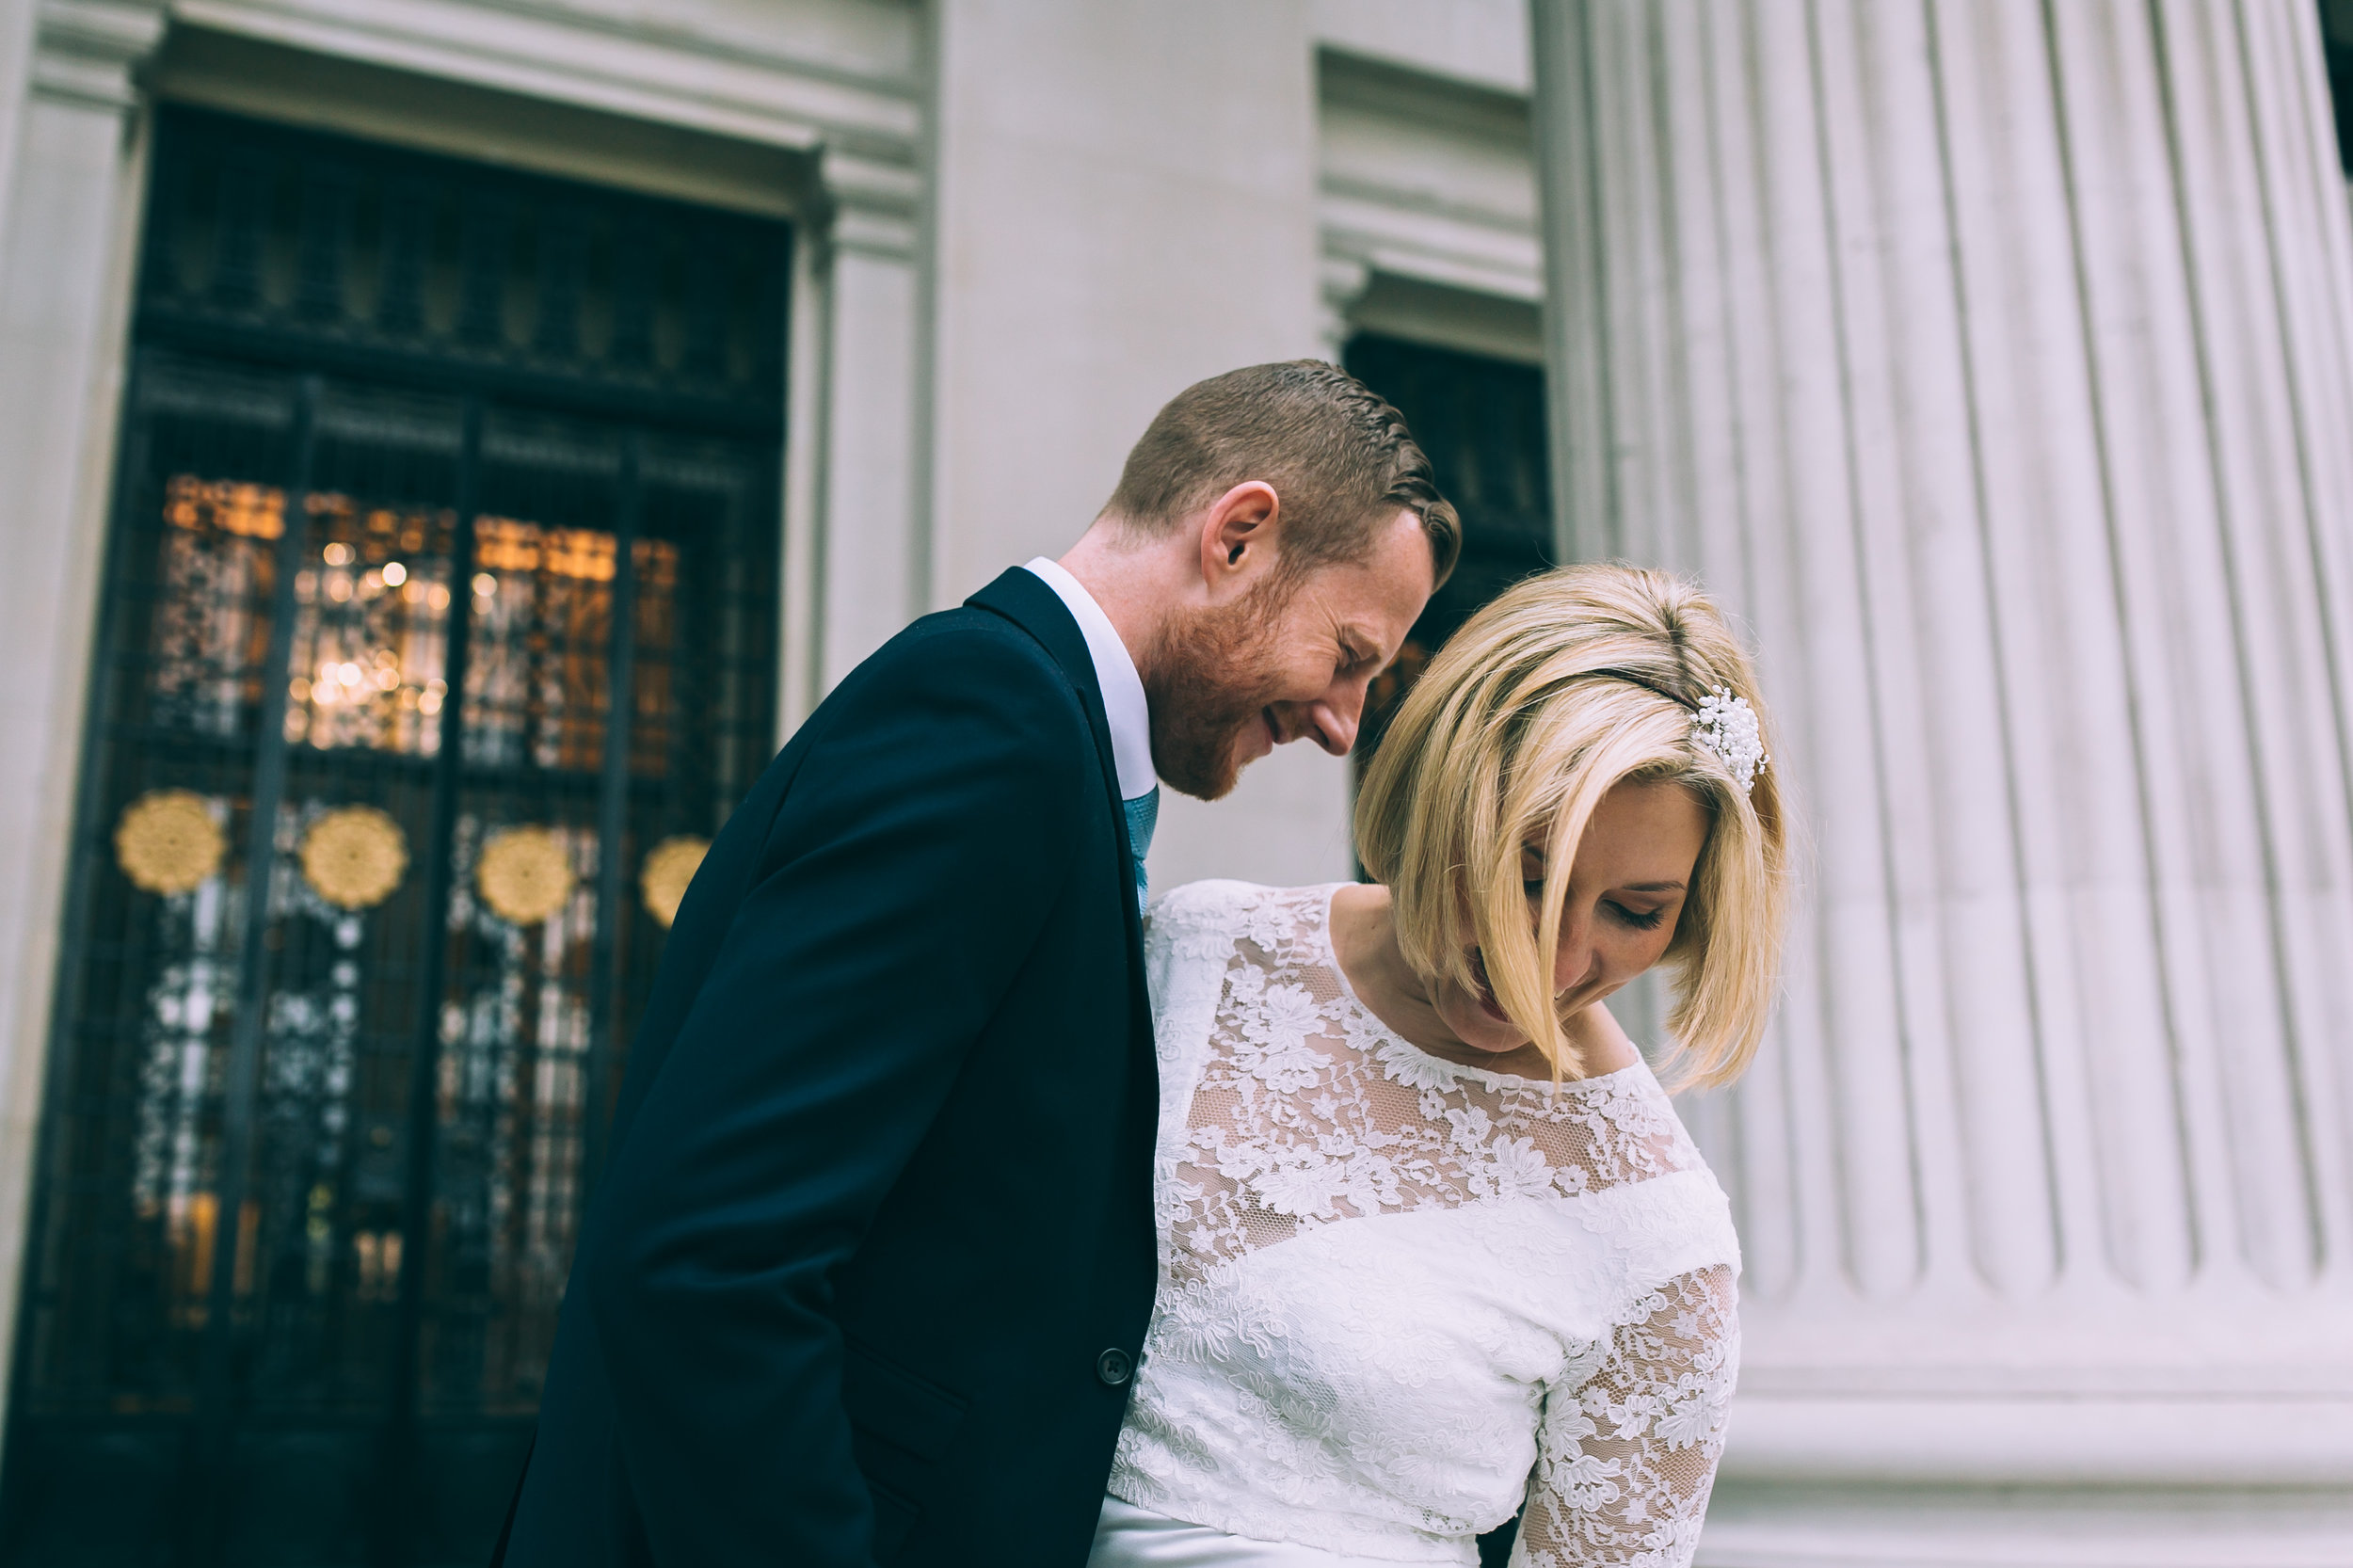 Alex and Ian-Wedding-at-Trinity House-Oyster Shed London-tom-biddle-photography - tb0022.jpg